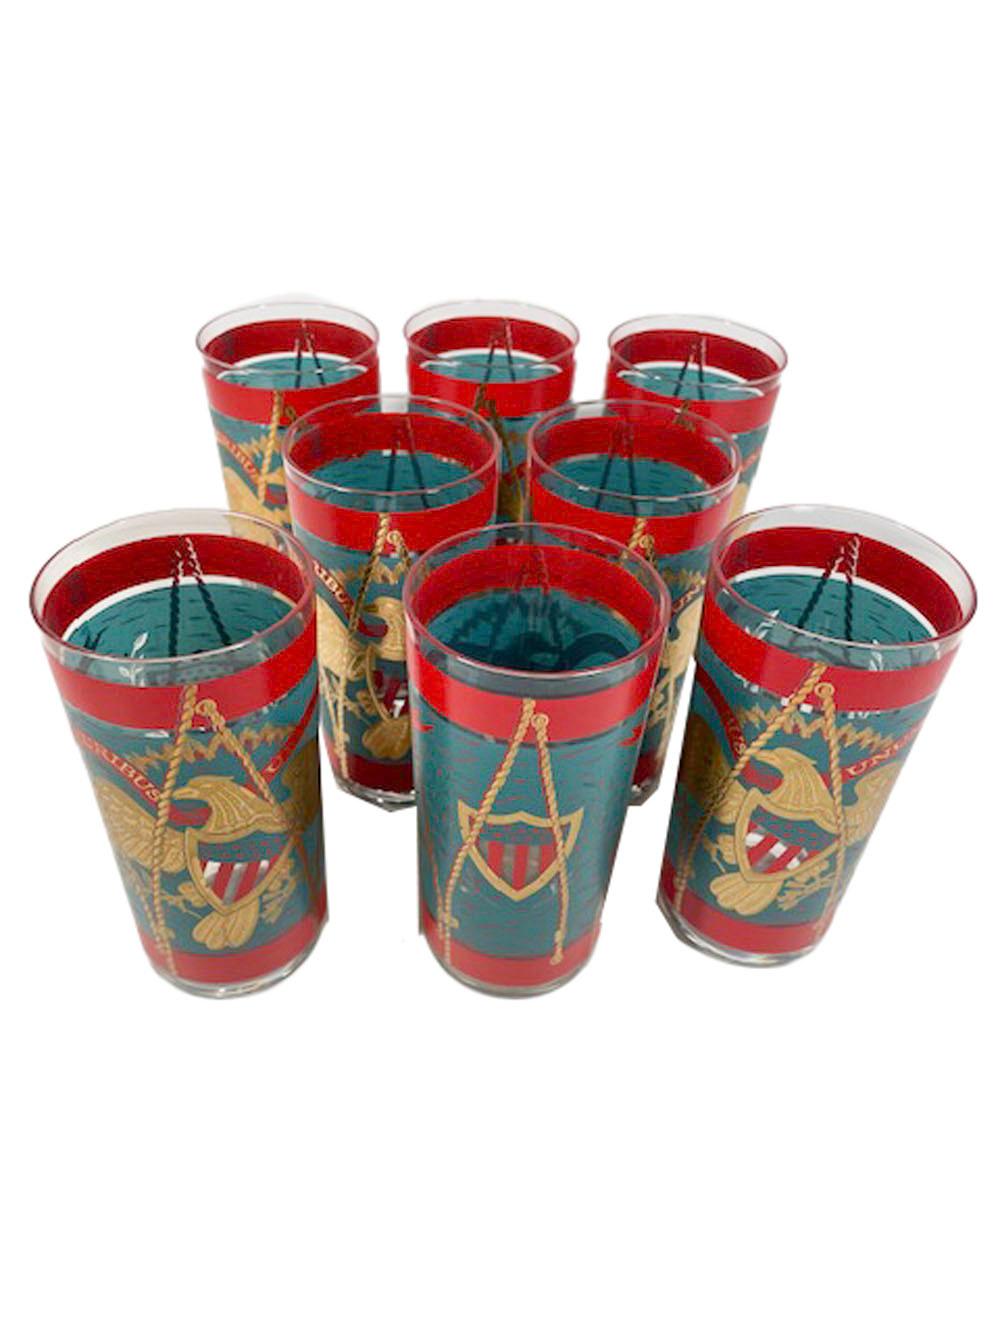 Vintage Cera Patriotic Drum Highball Glasses in Teal & Red Enamel with 22k Gold In Good Condition For Sale In Nantucket, MA